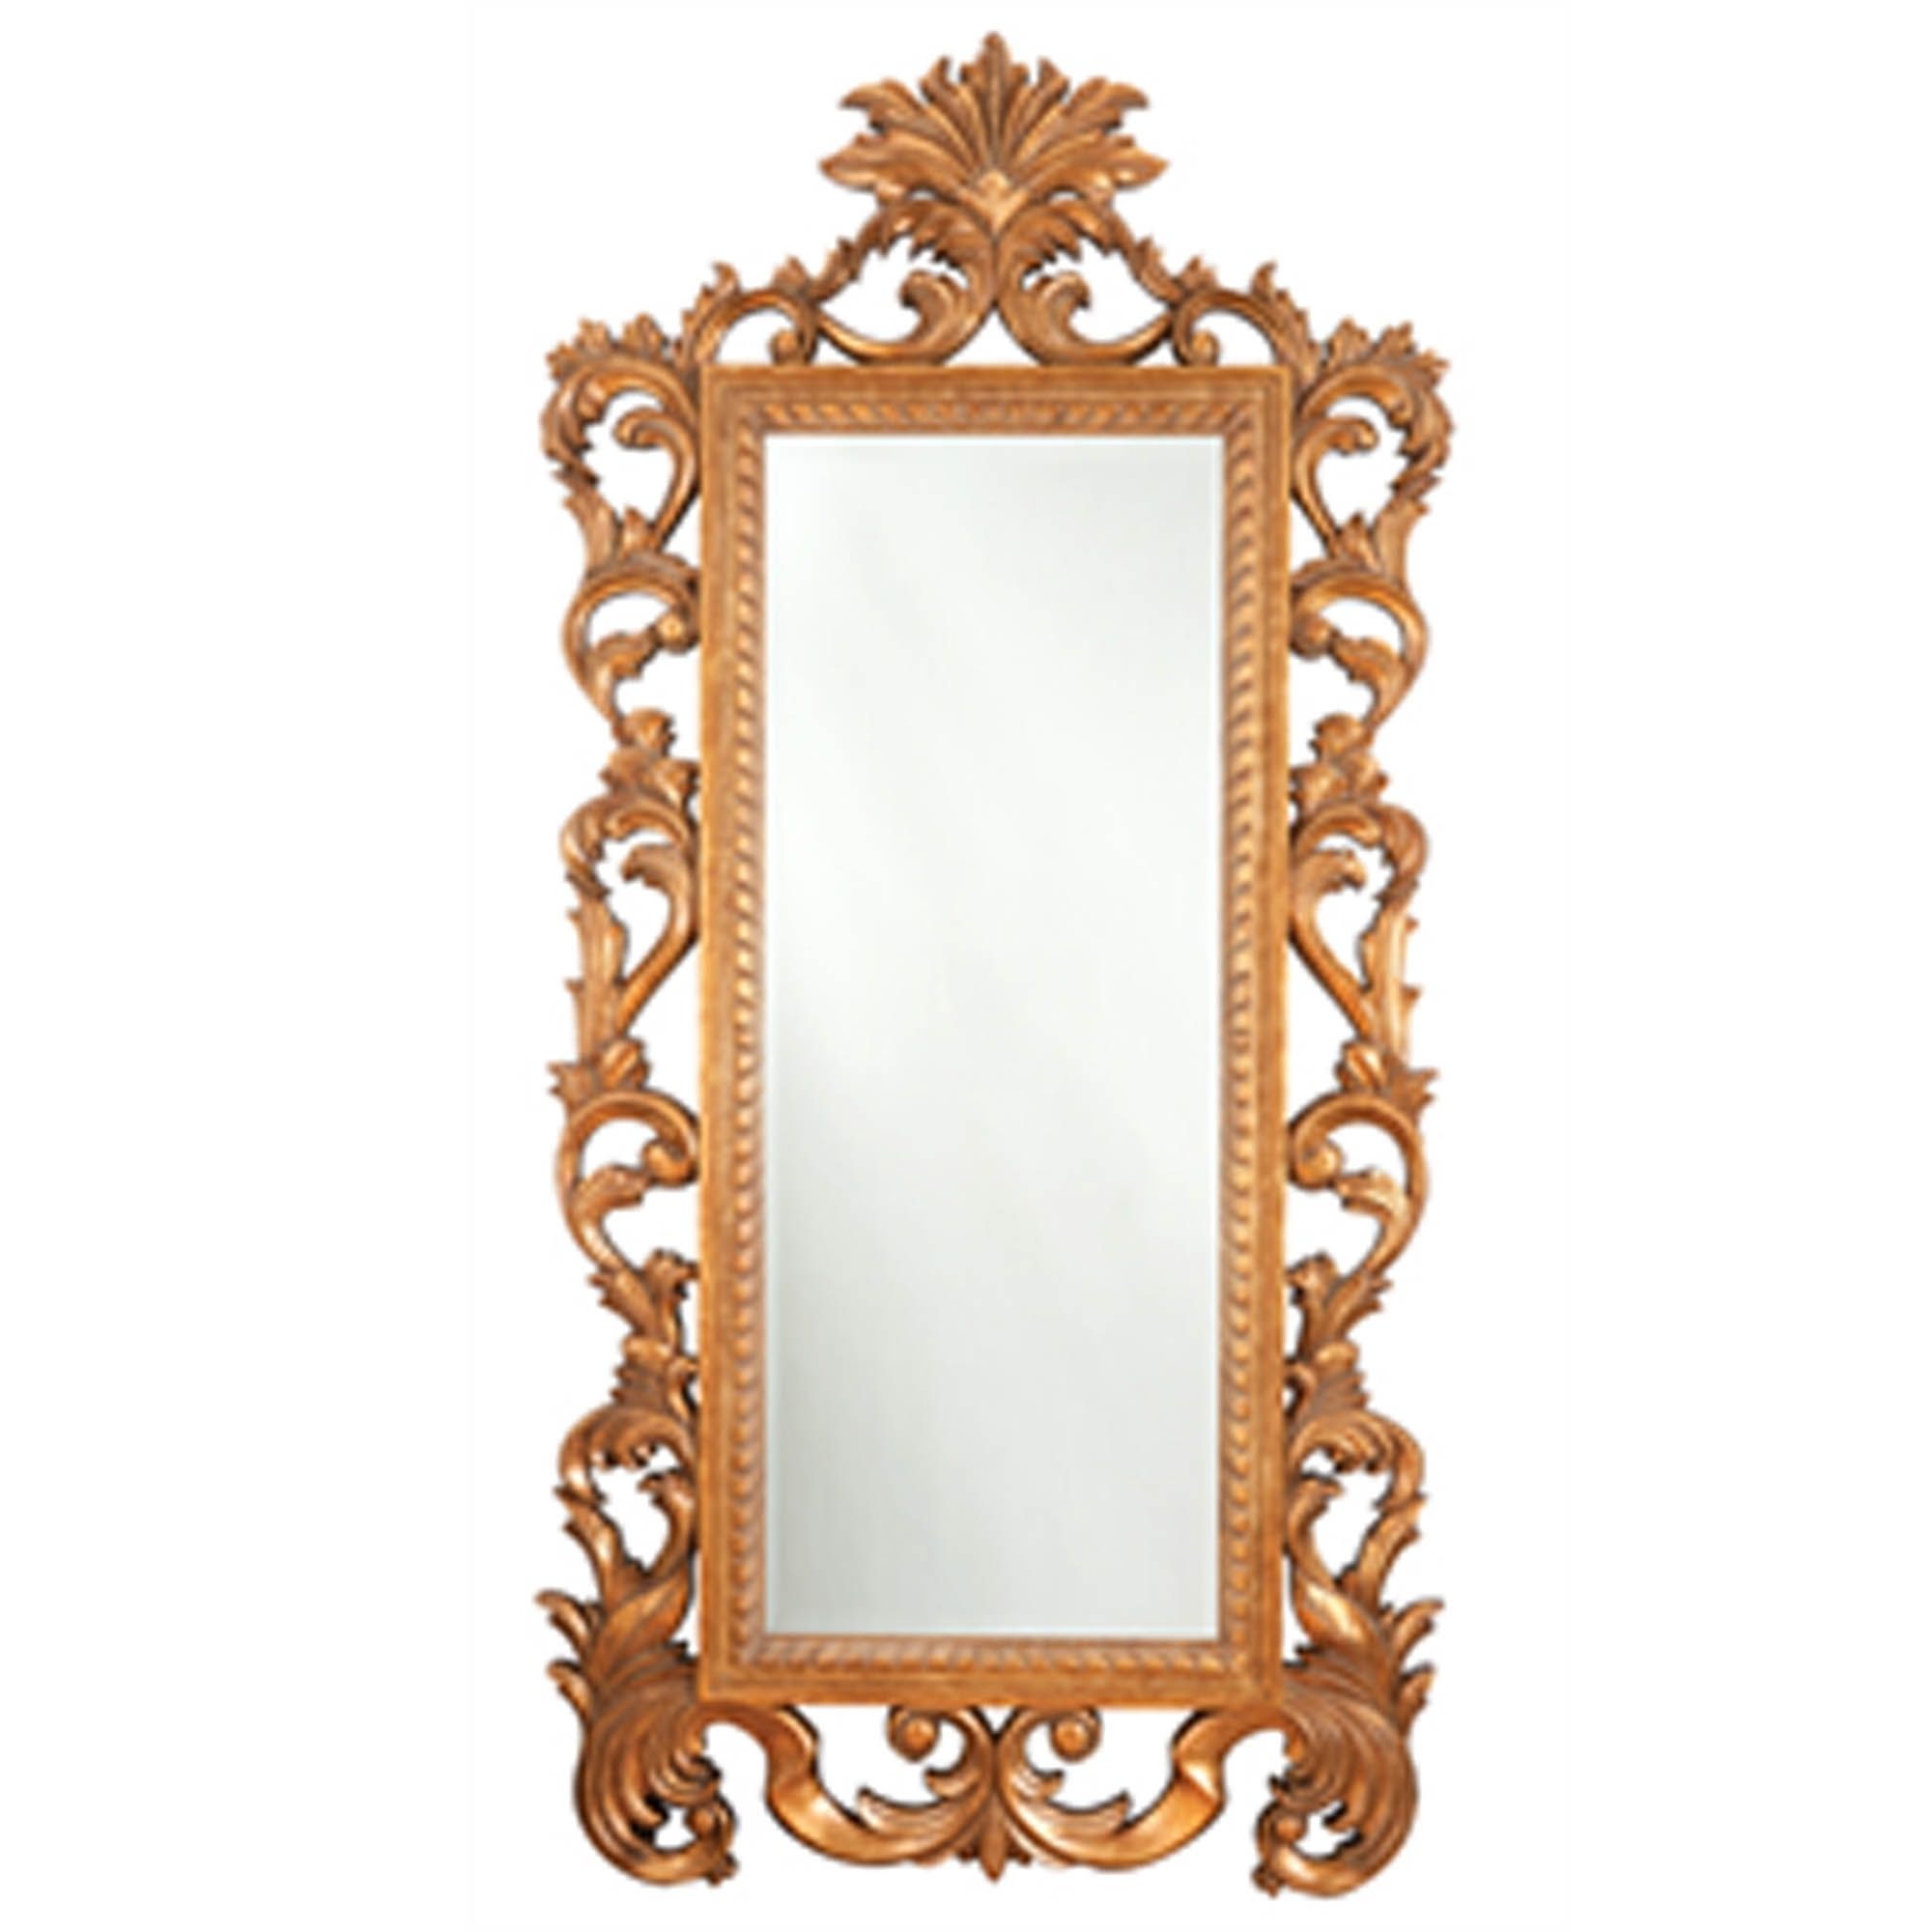 Gold Antique French Style Rectangular Ornate Wall Mirror | Hd365 For Dark Gold Rectangular Wall Mirrors (Photo 8 of 15)